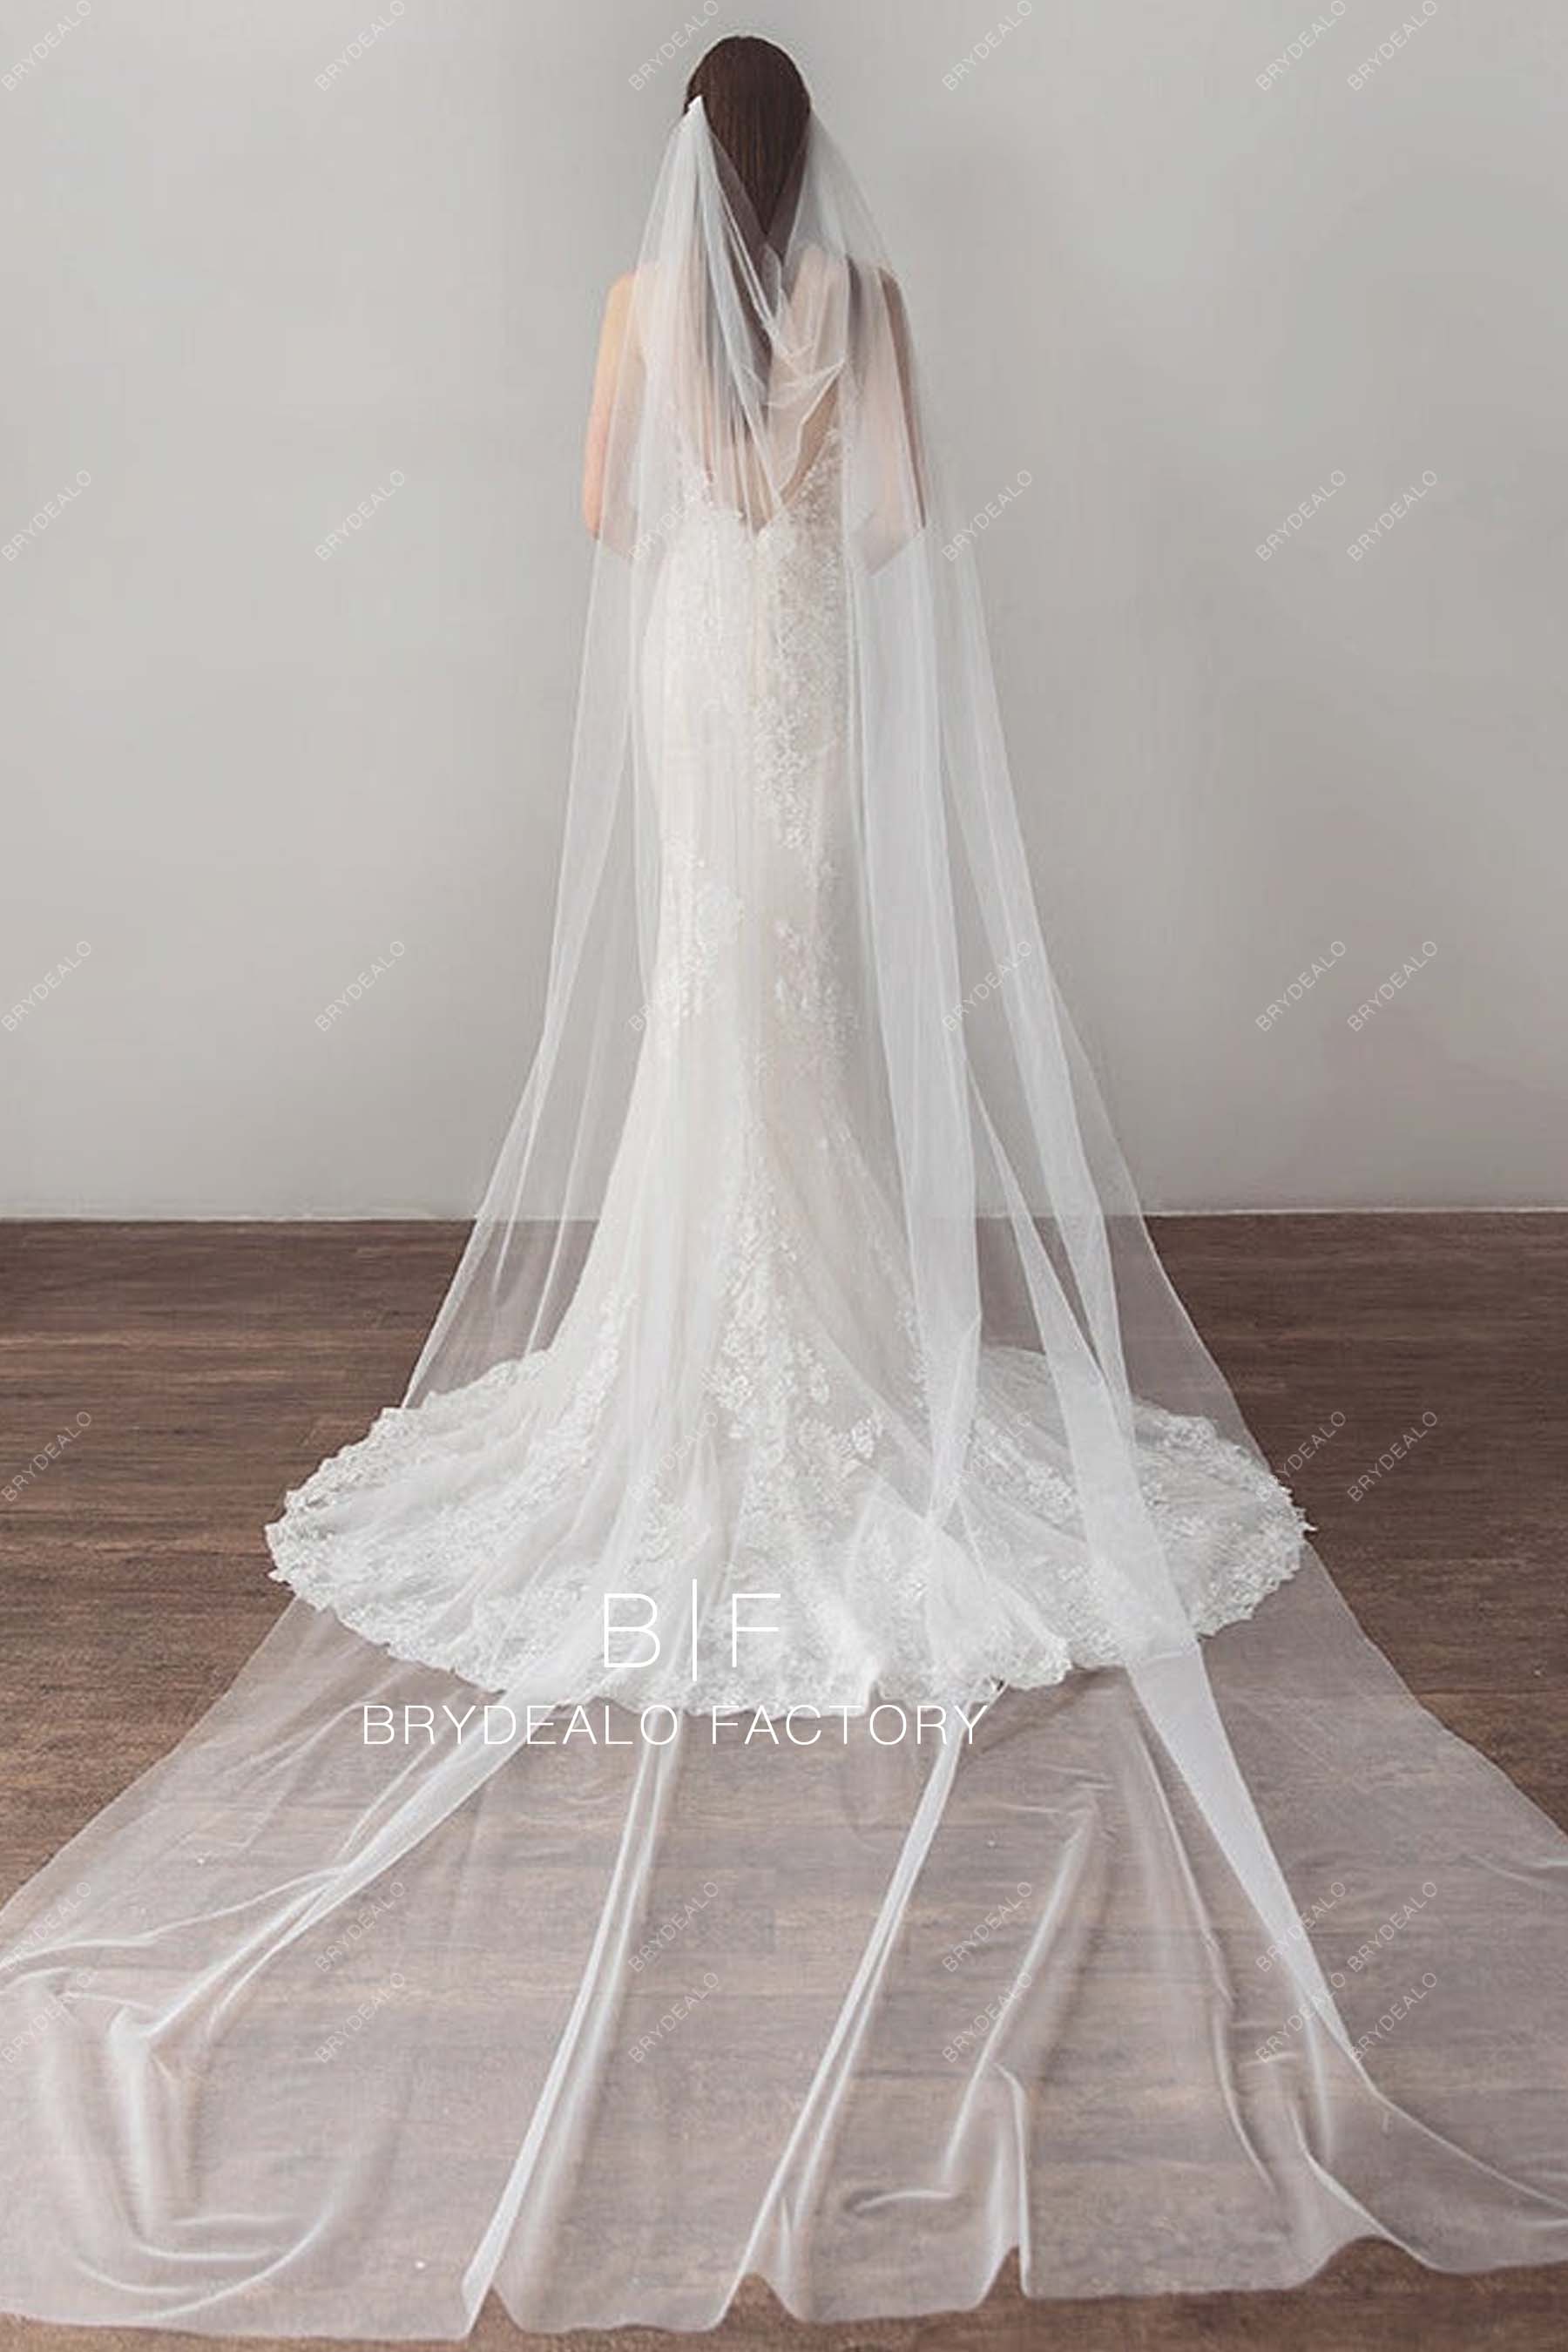 https://cdn.shopify.com/s/files/1/0558/7599/3647/products/cathedral-length-wedding-veil-wholesale-plain-tulle-veil.jpg?v=1670318824&width=1800